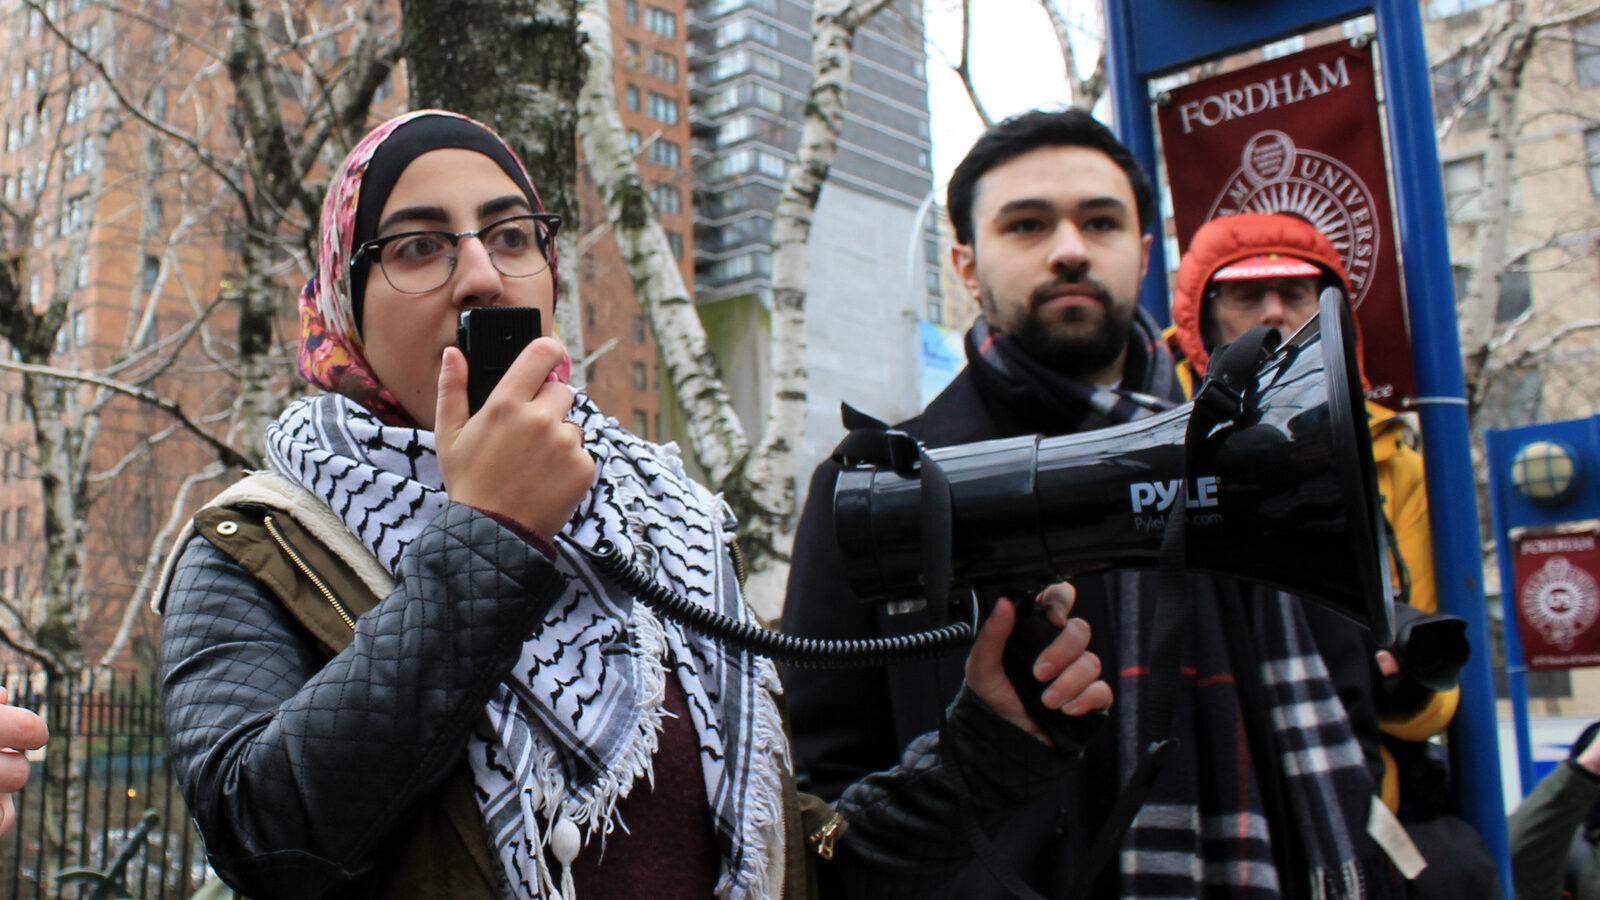 Students and supporters protest Fordham University’s ban on Students for Justice in Palestine, a student group which advocates the rights of Palestinians. (Photo: Joe Catron/MintPress)